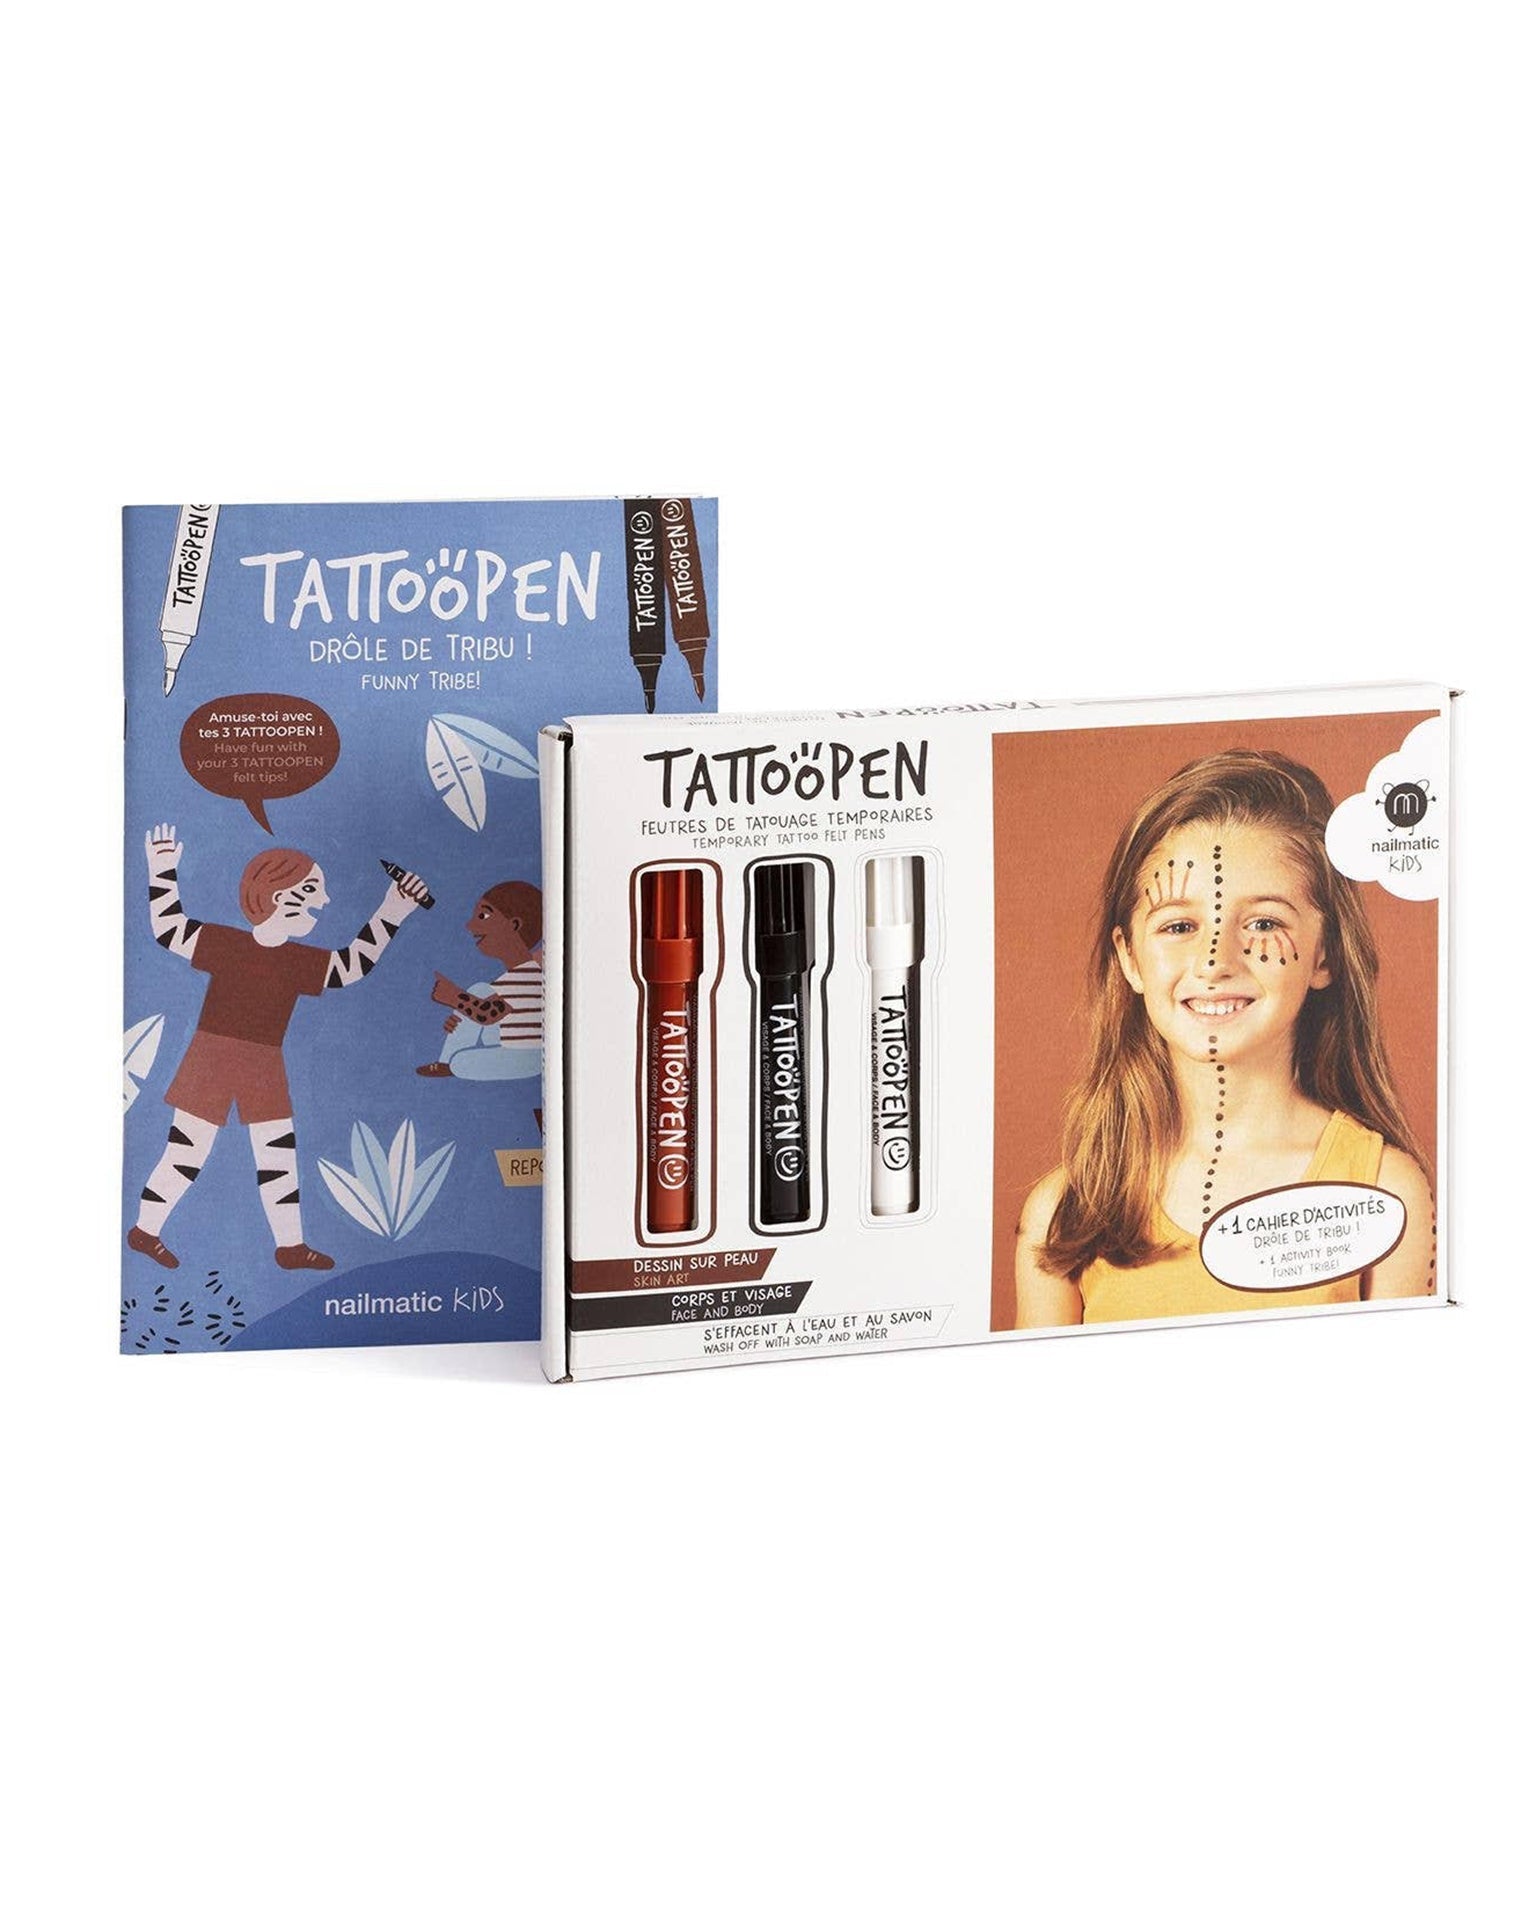 Little nailmatic play tattoopen set in tribe